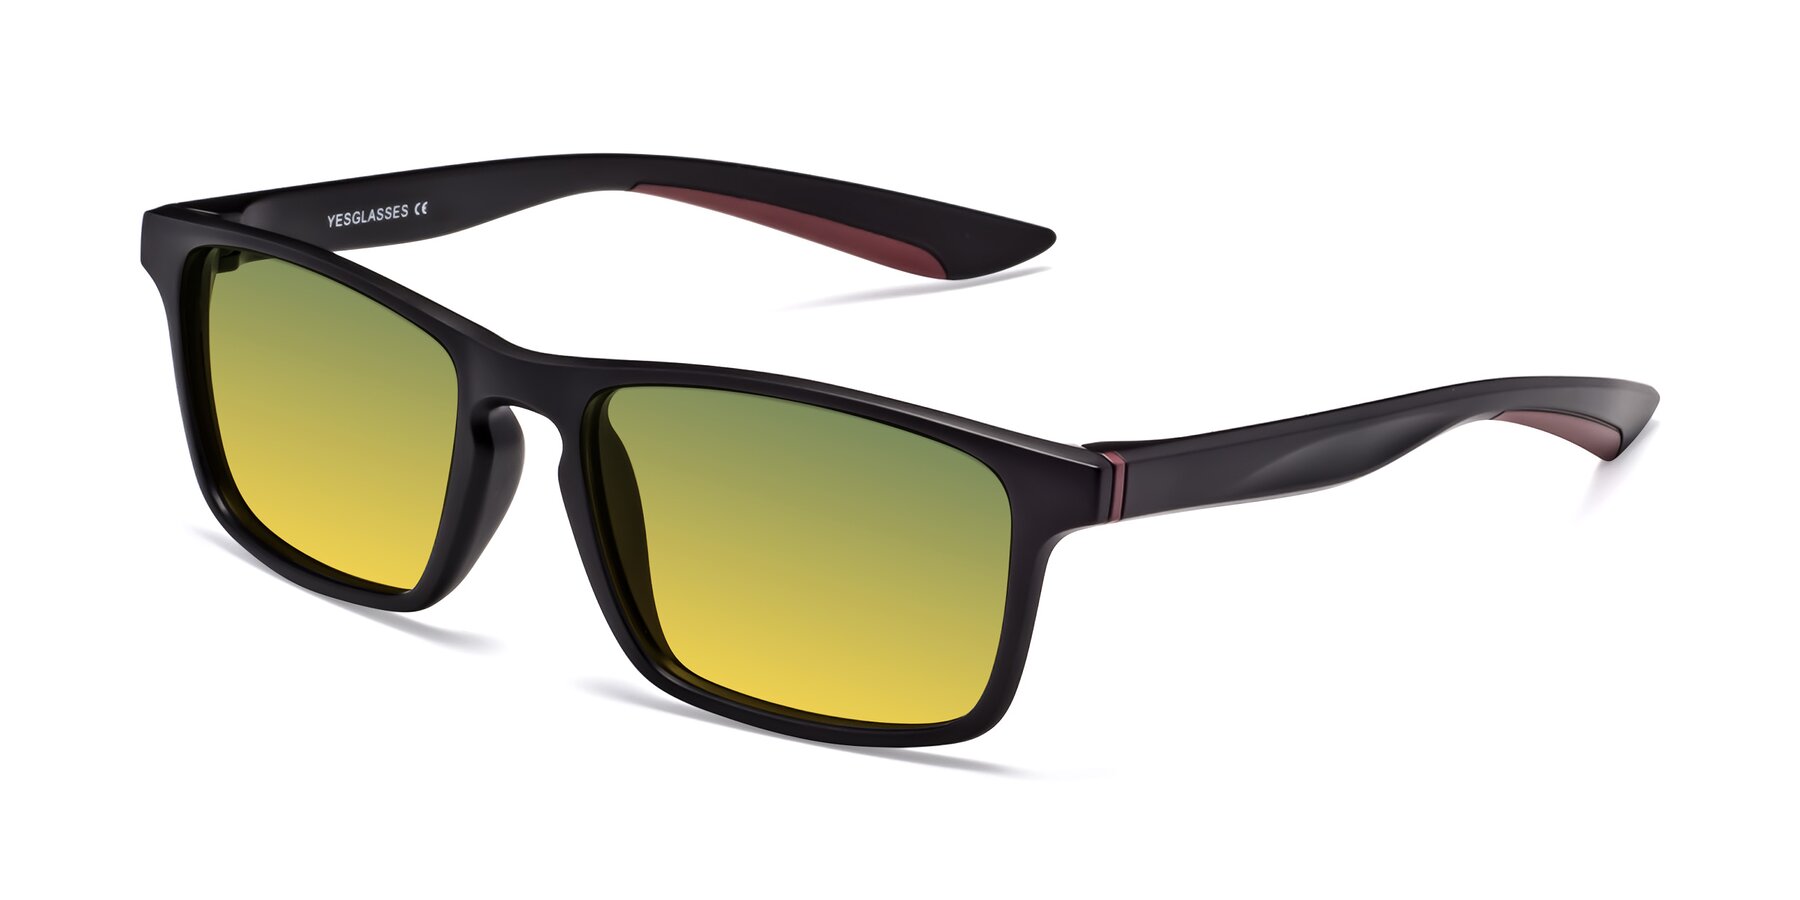 Angle of Passion in Matte Black-Wine with Green / Yellow Gradient Lenses